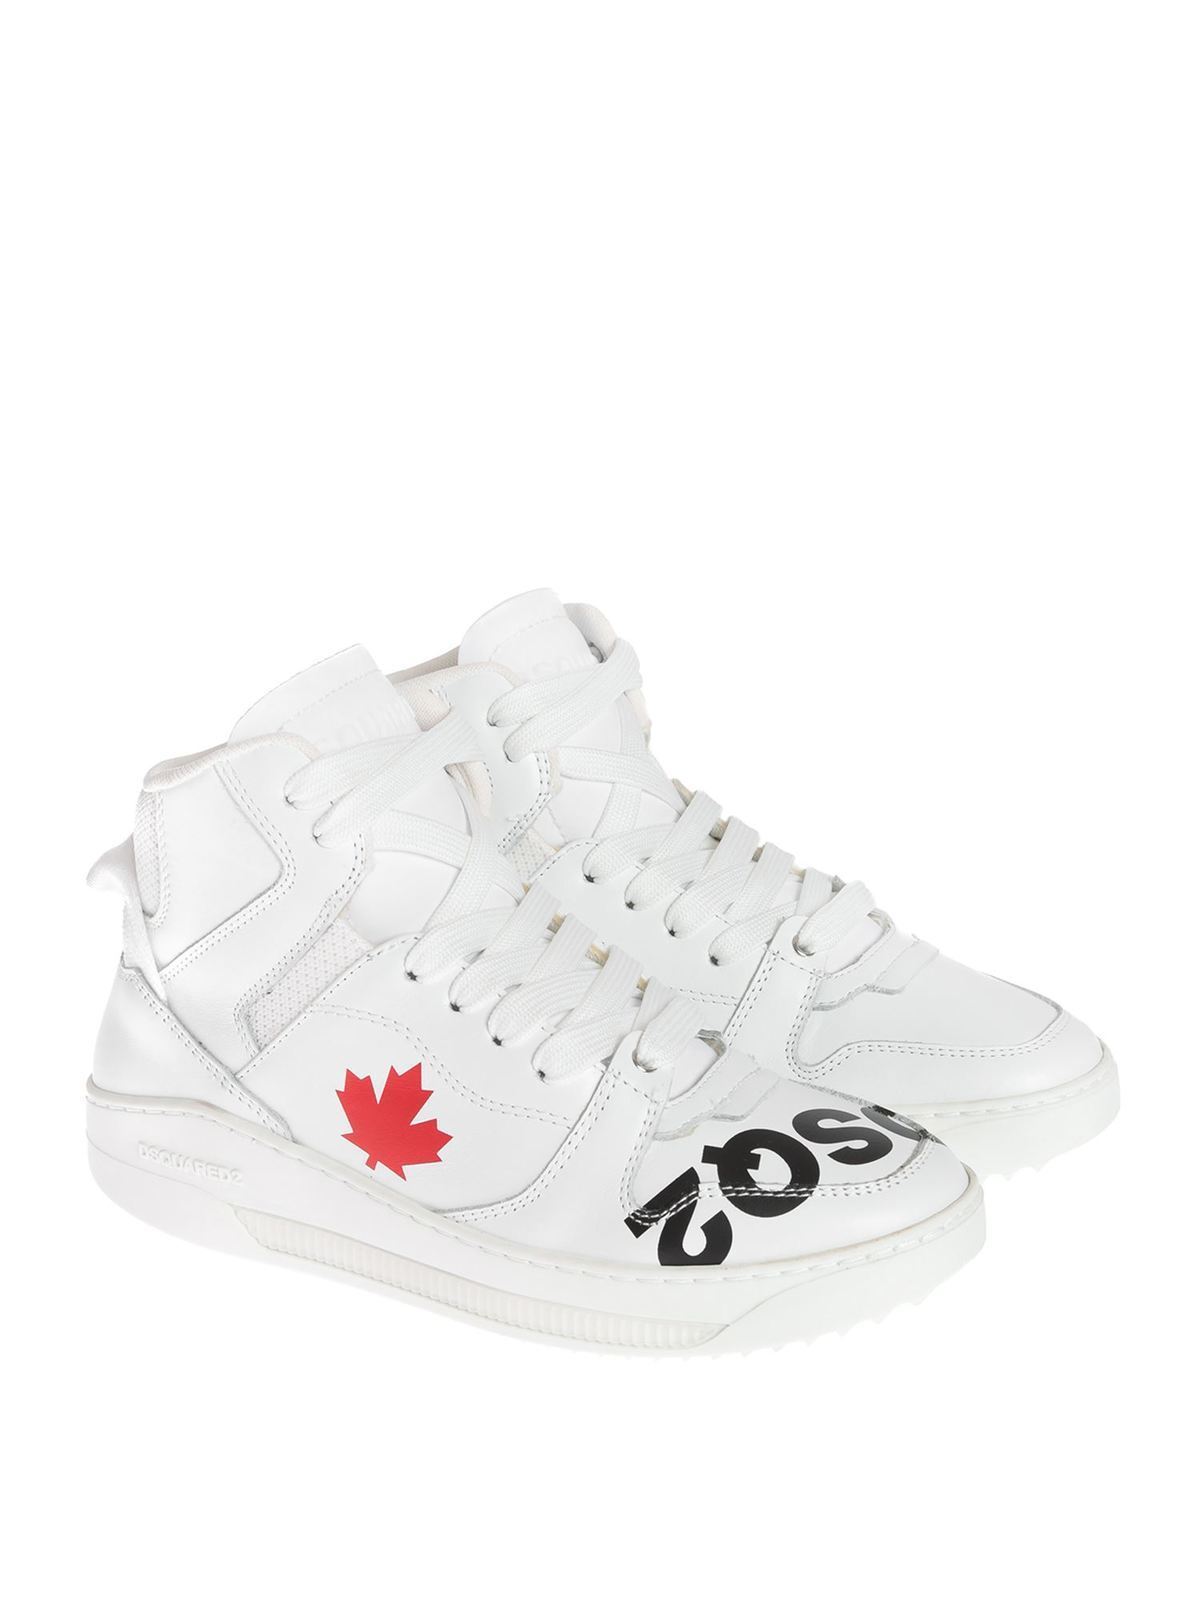 Dsquared2 - Barkley low-top sneakers in 